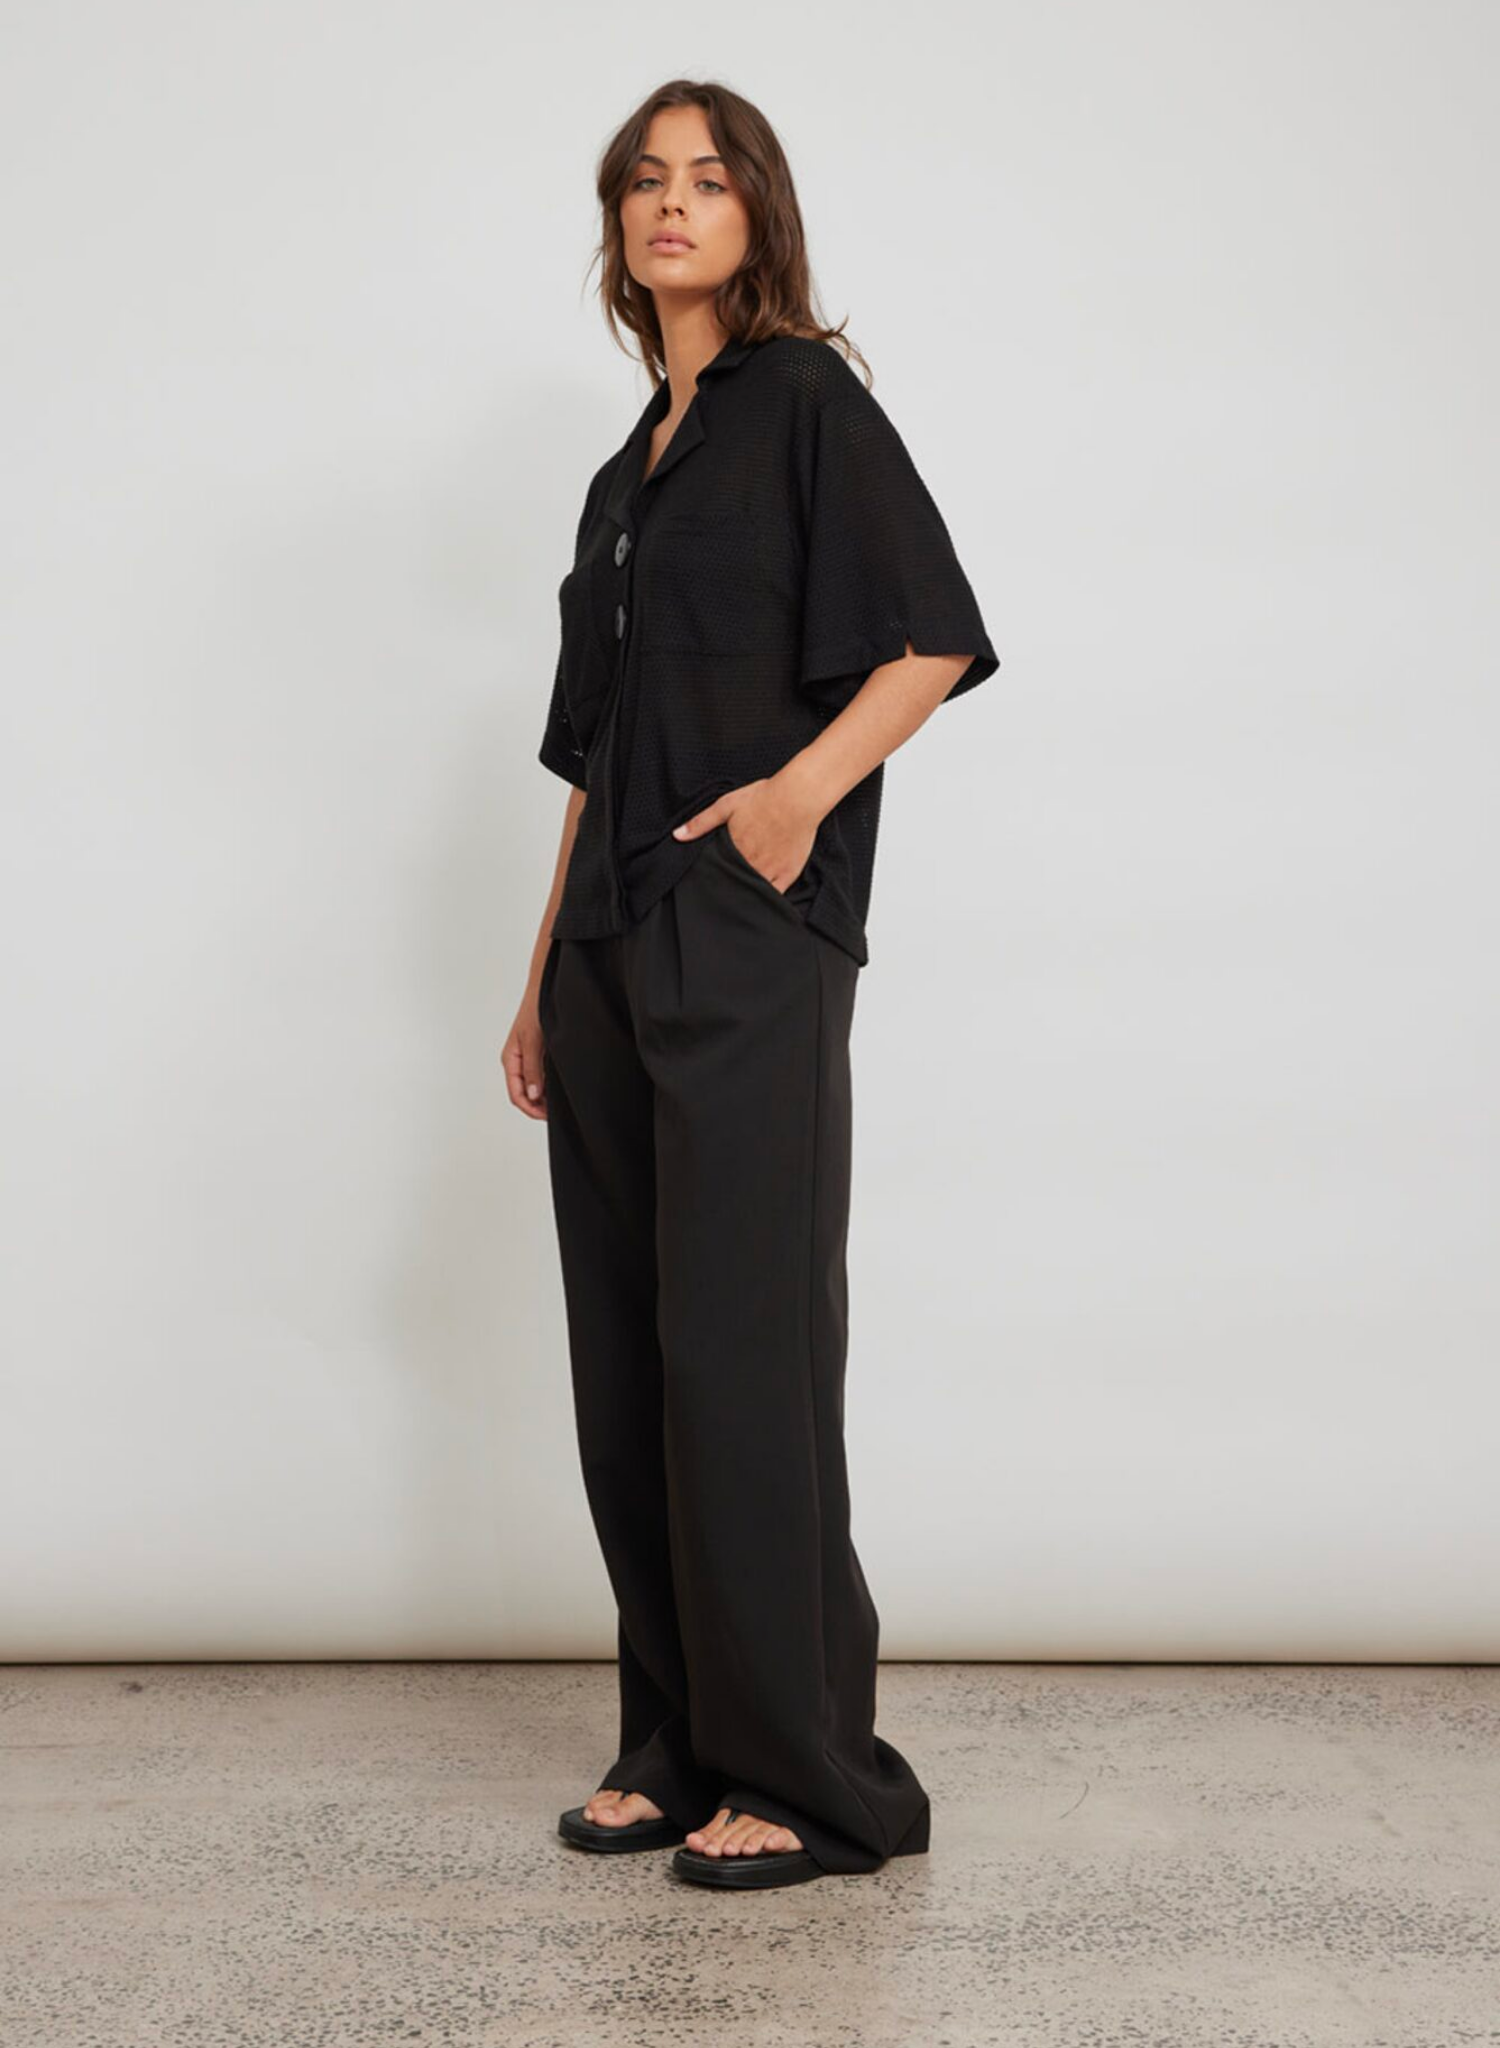 Tailored wide leg trouser Heavyweight suiting fabrication Functional front pockets Large belt loop detail Pant is unlined